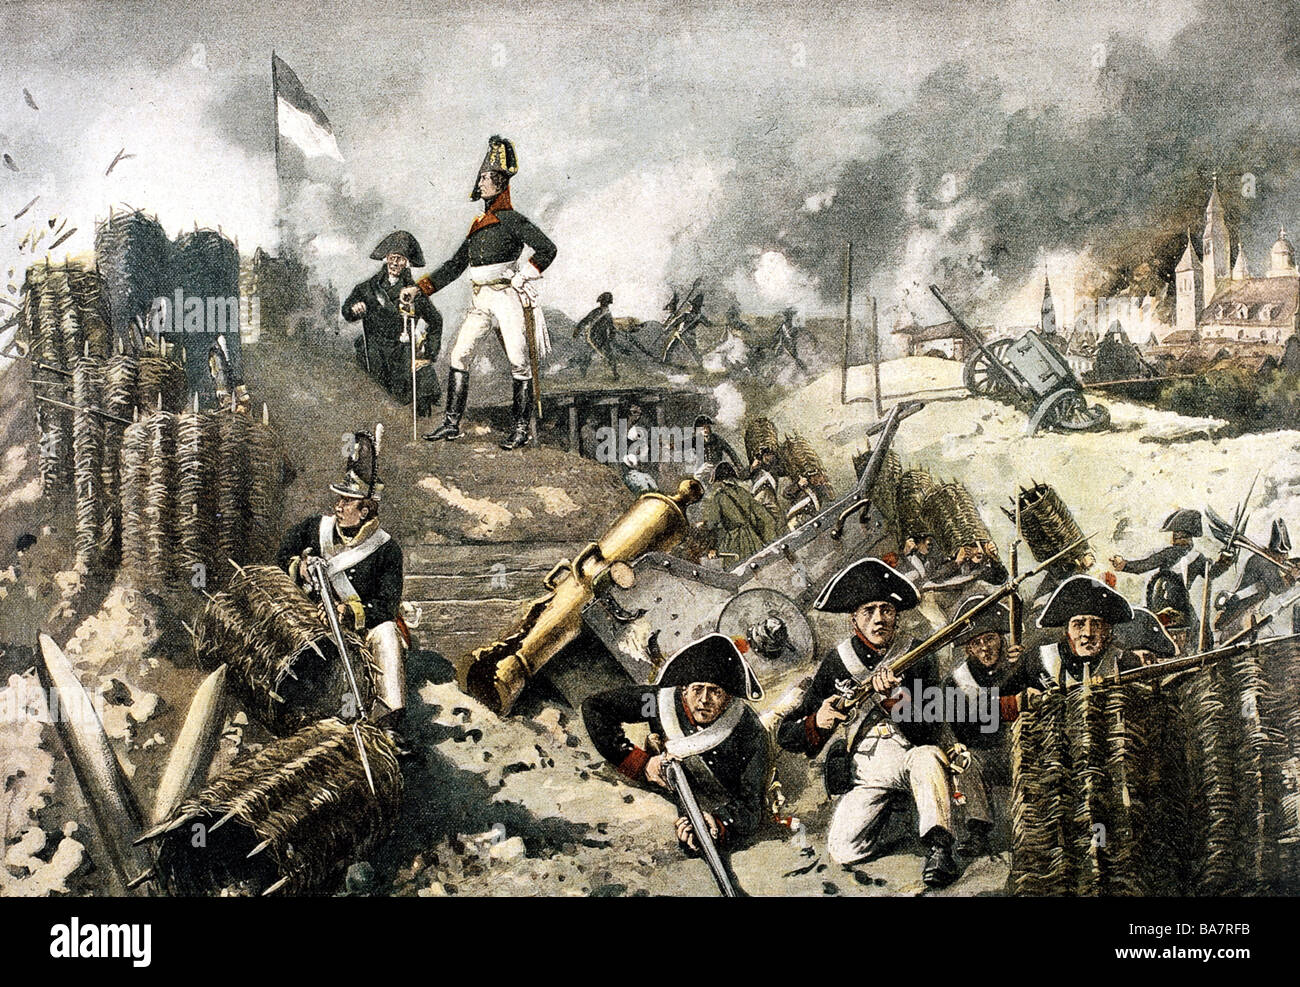 events, War of the Forth Coalition 1806 - 1807, Siege of Kolberg, March - July 1807, general August Wilhelm Neidhardt von Gneisenau and Capitain Joachim Nettelbeck on the walls, after painting by Ernst Zimmer, late 19th century, Napoleonic Wars, Germany, Prussia, Poland, Kolobrzek, Pommerania, grenadier, soldiers, fortifications, rampart, historic, historical, people, Stock Photo